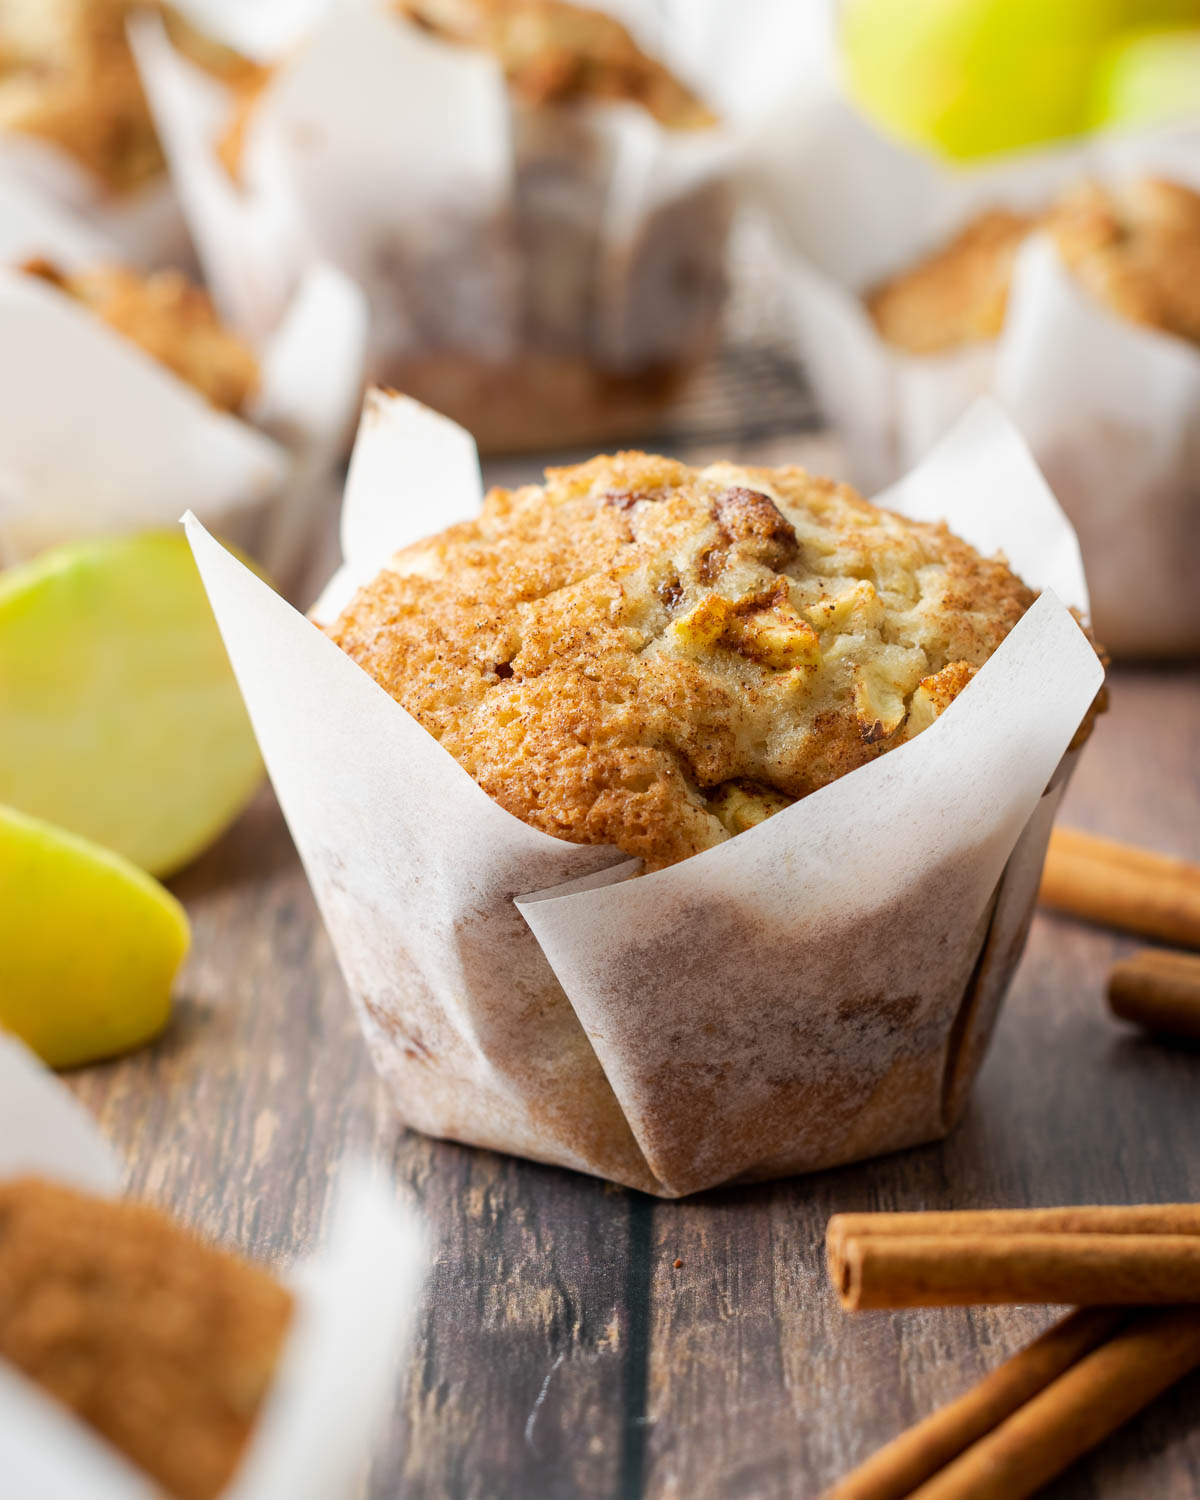 An apple muffin sprinkled with sugar and cinnamon sitting on a wooden table.